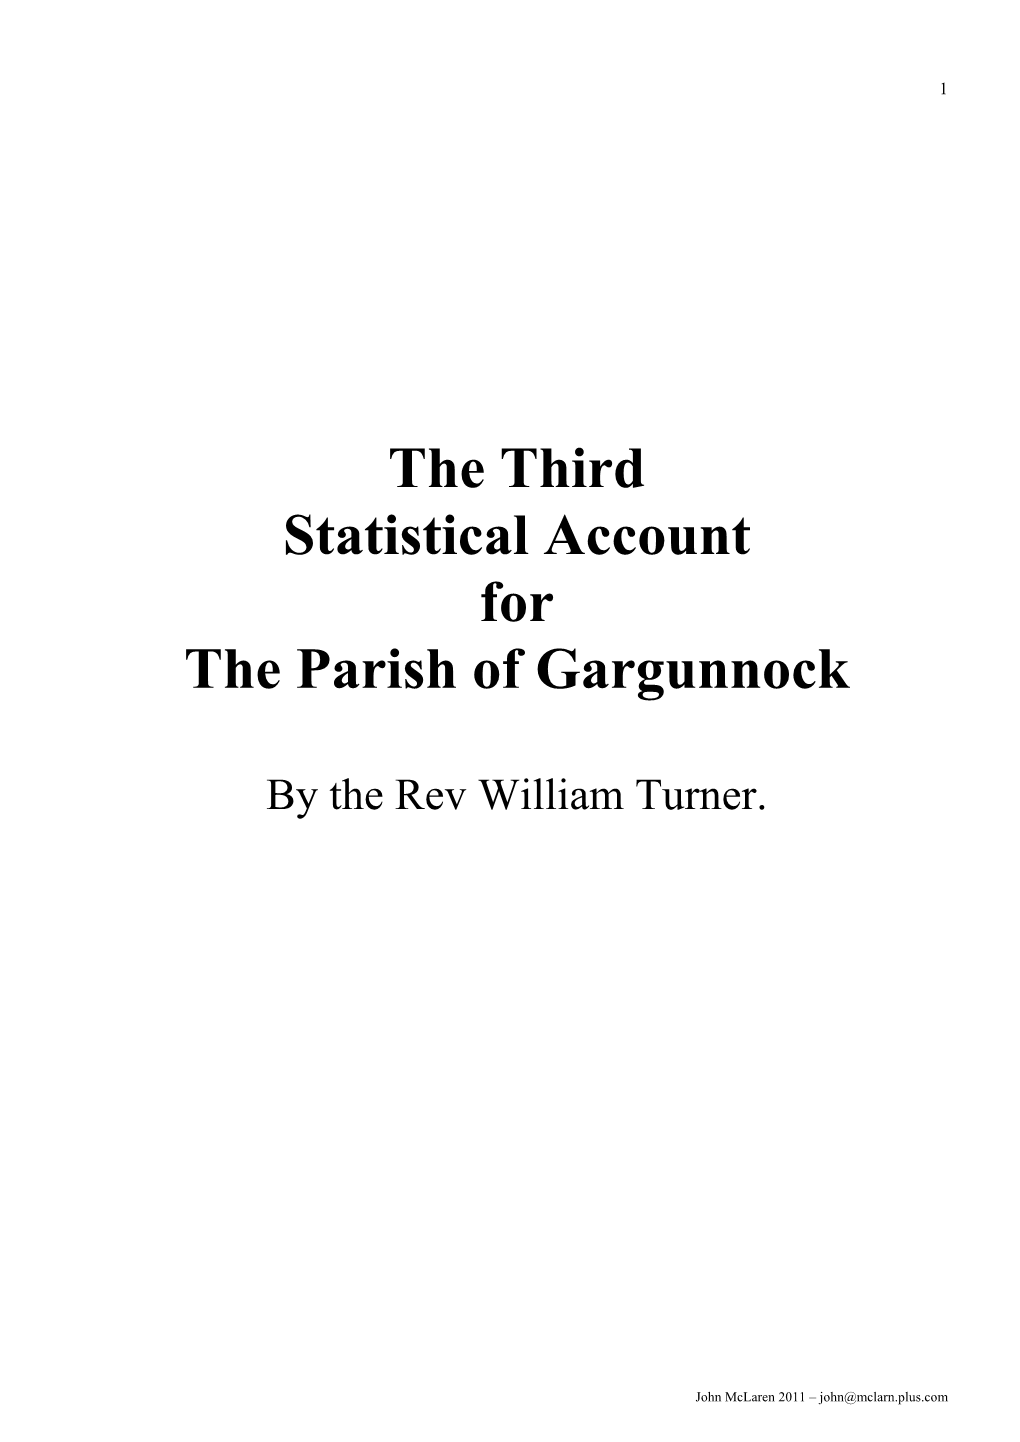 The Third Statistical Account for the Parish of Gargunnock